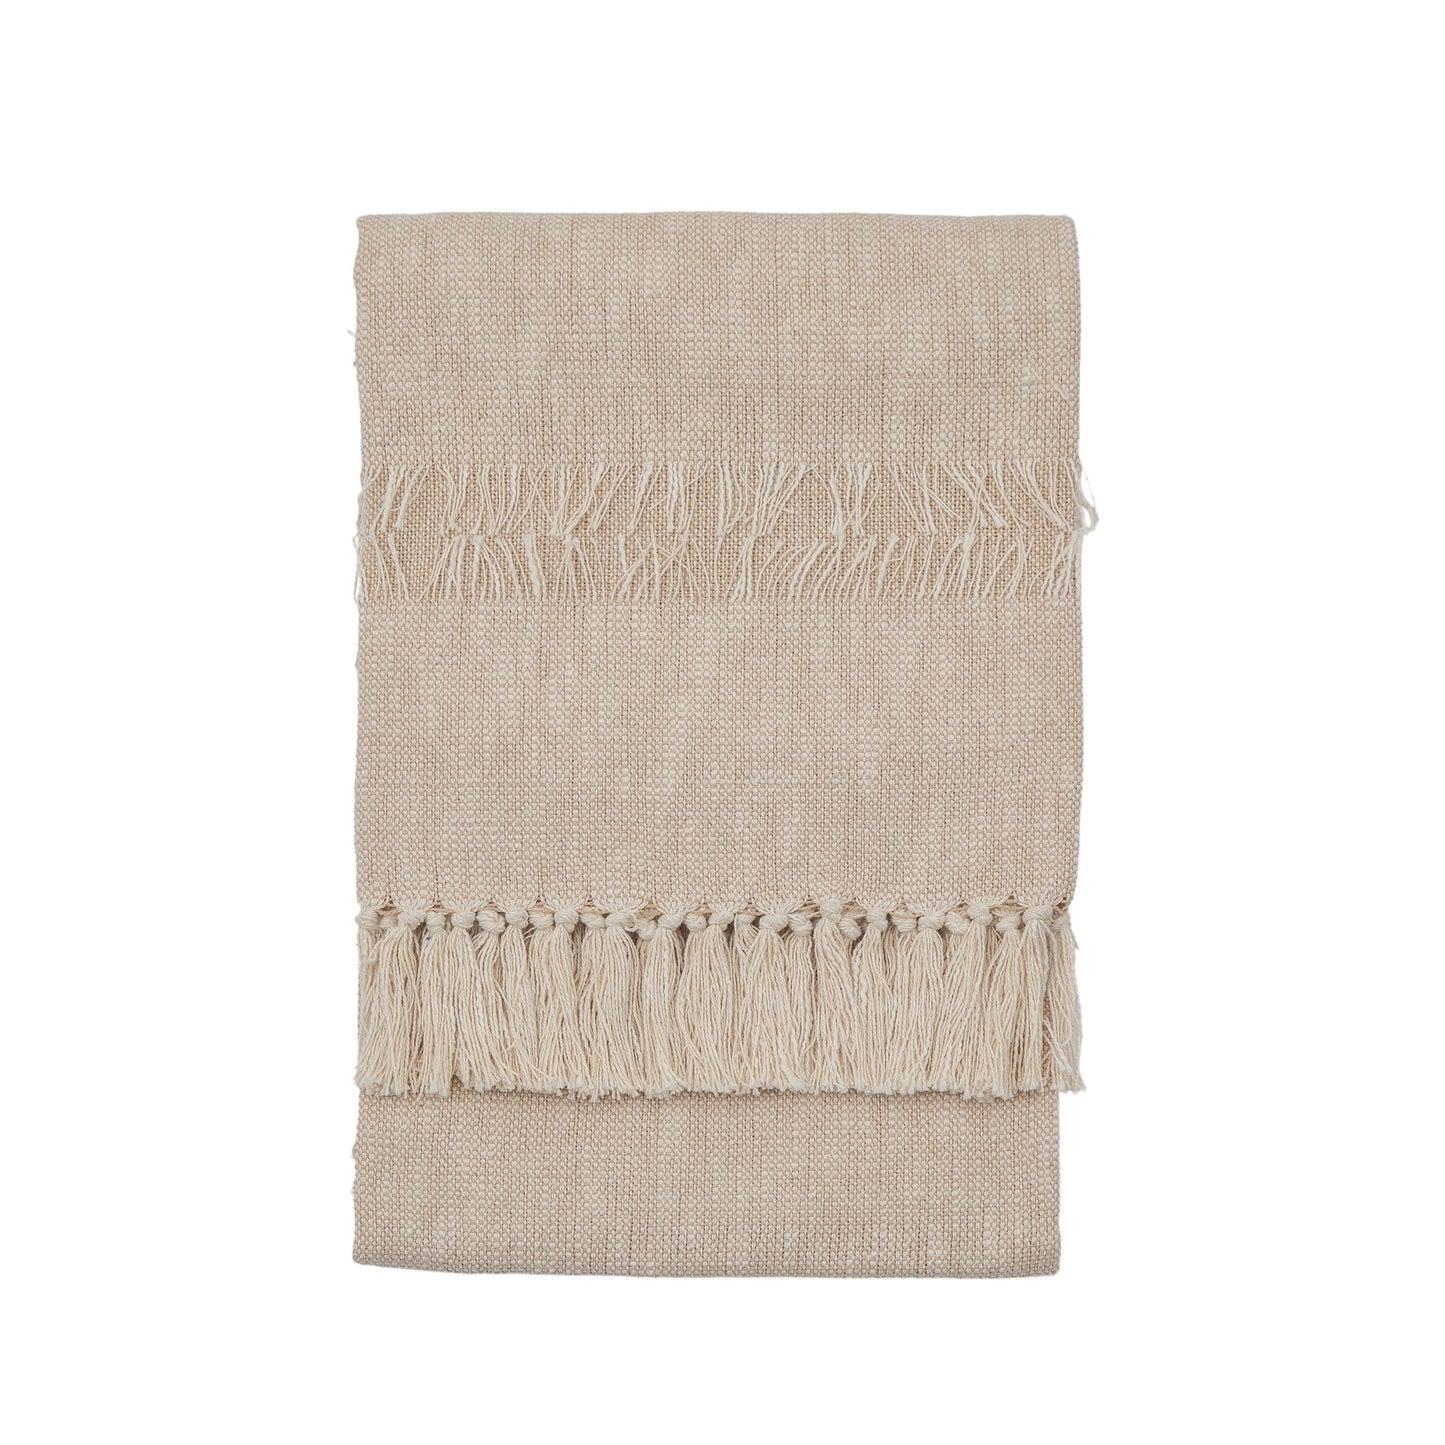 Woven Fringed Throw Natural 1300x1700mm